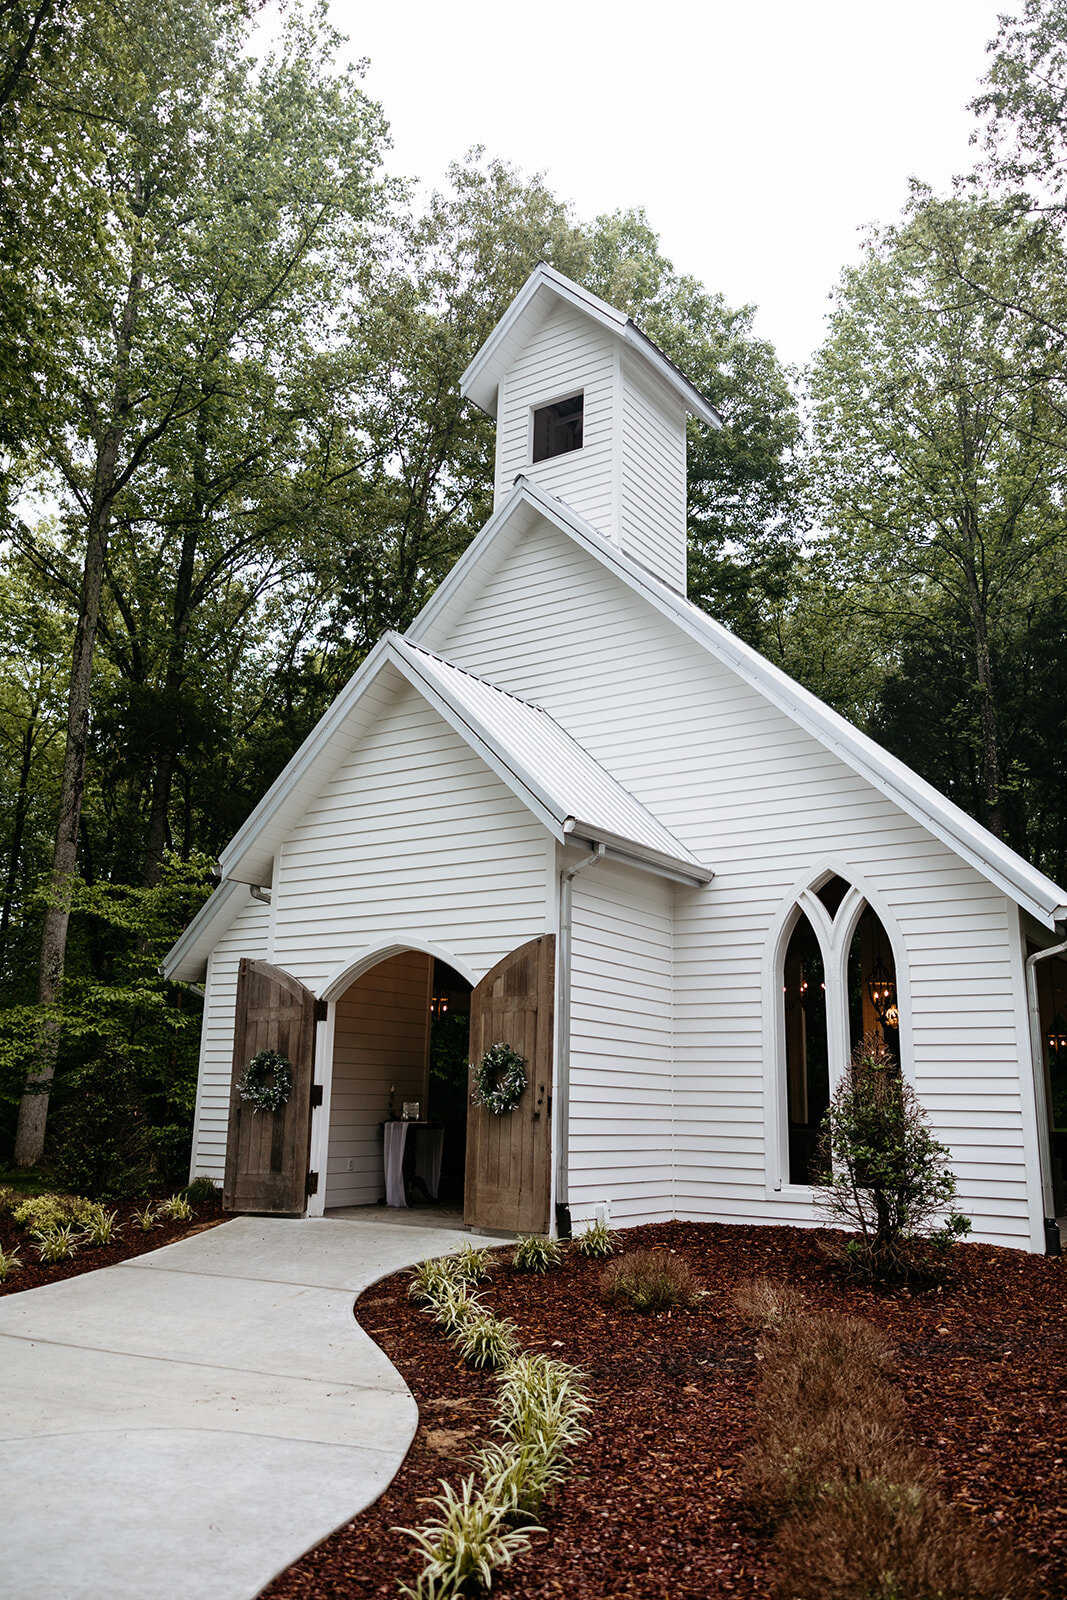 The Chapel at Firefly Lane